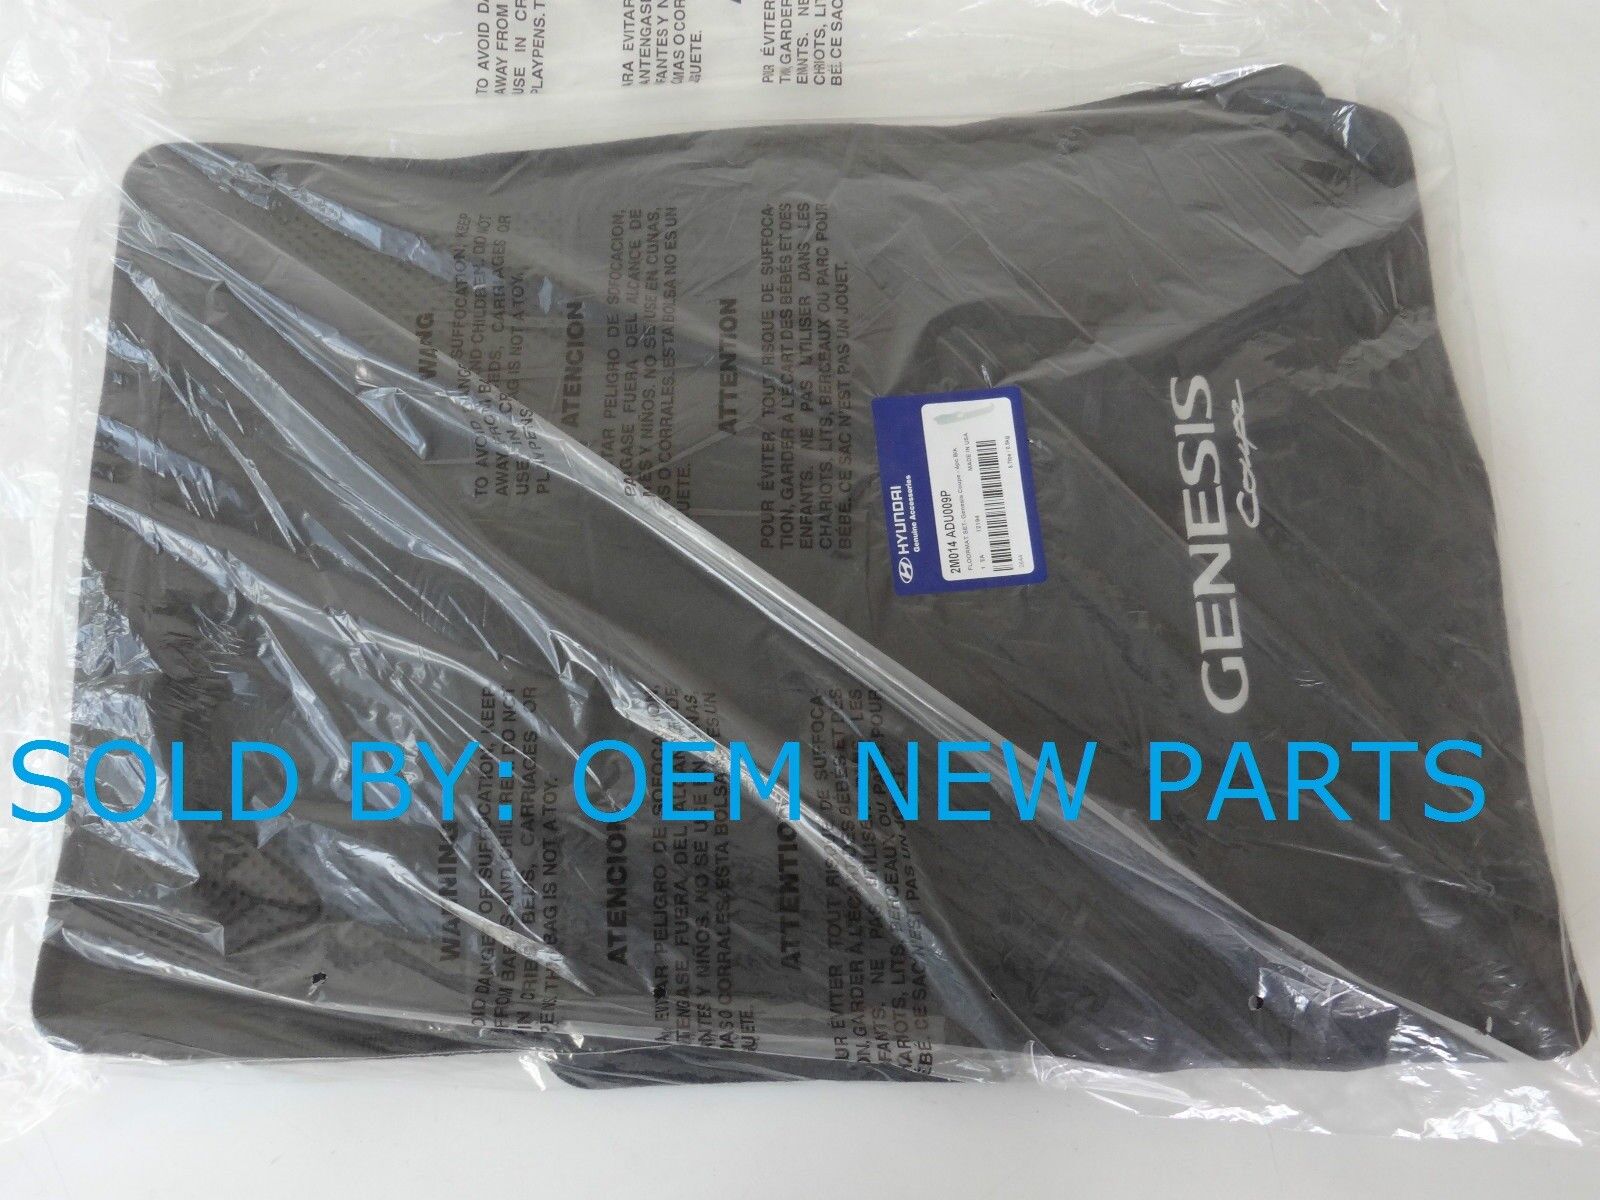 NEW 2010-2014 Hyundai Genesis 2 DR COUPE Carpeted Floor Mats FRONT & REAR, OEM